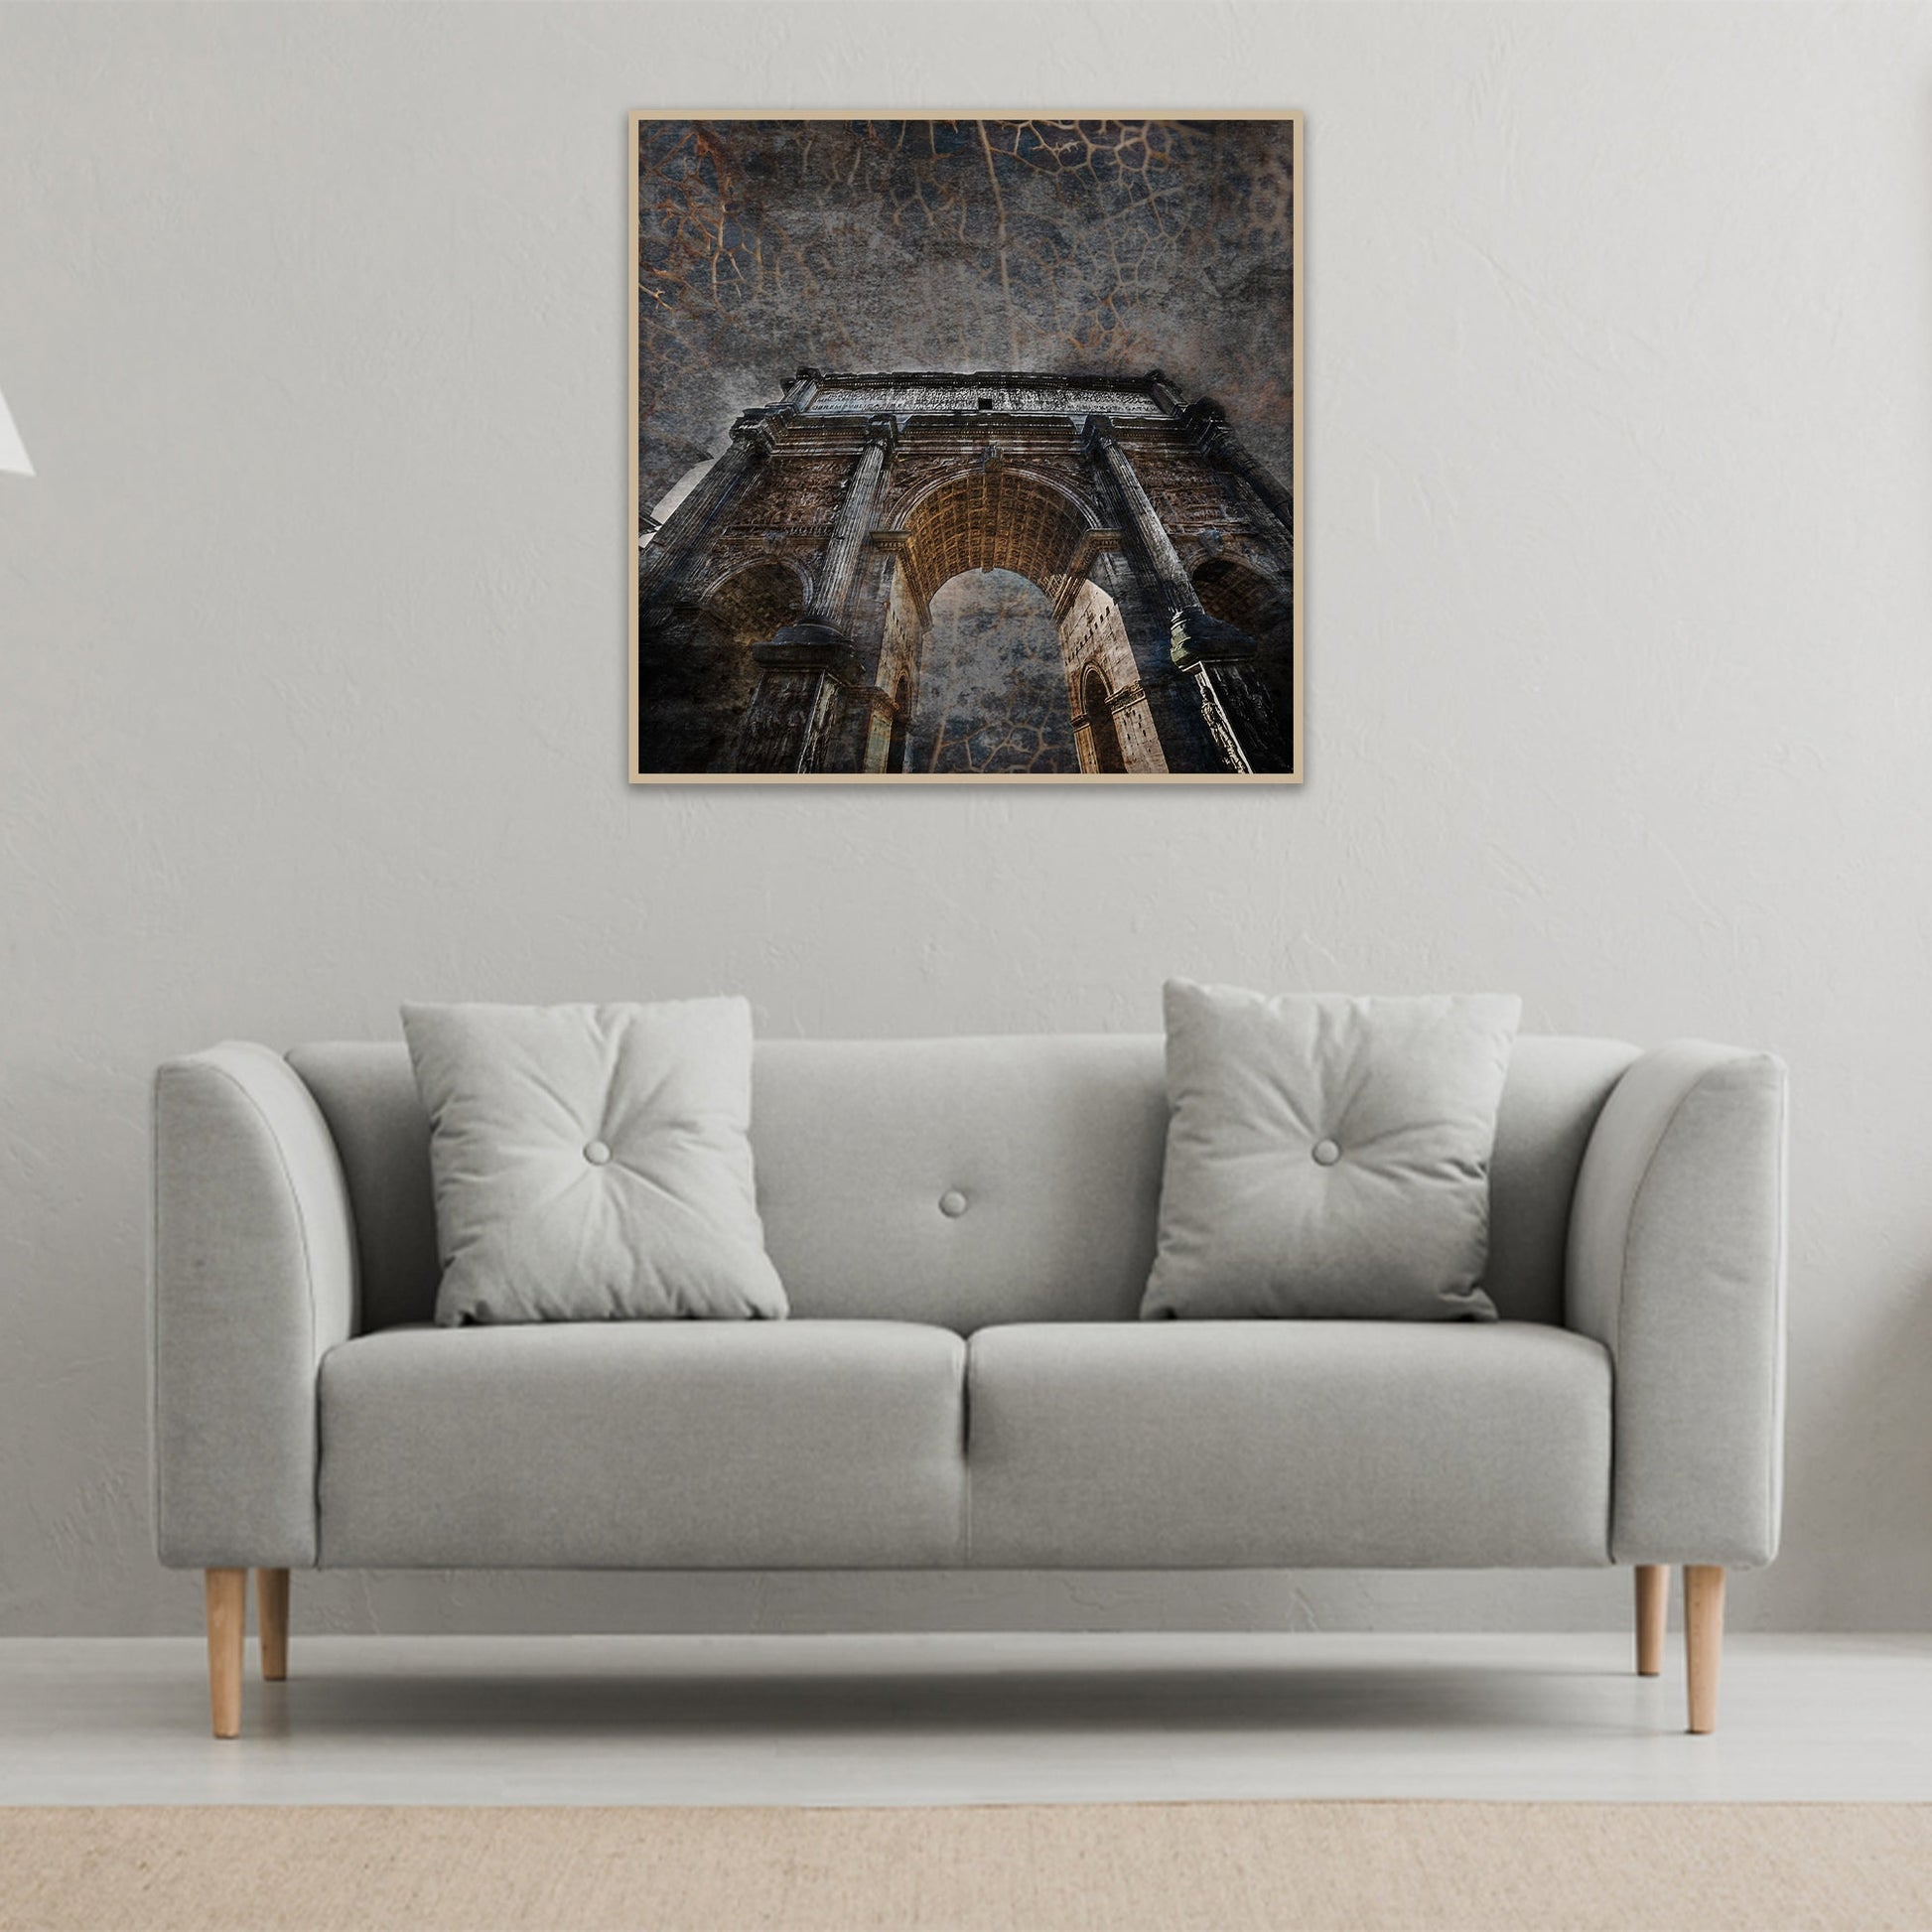 Abstract wall decor print captures the beauty of aging gracefully.